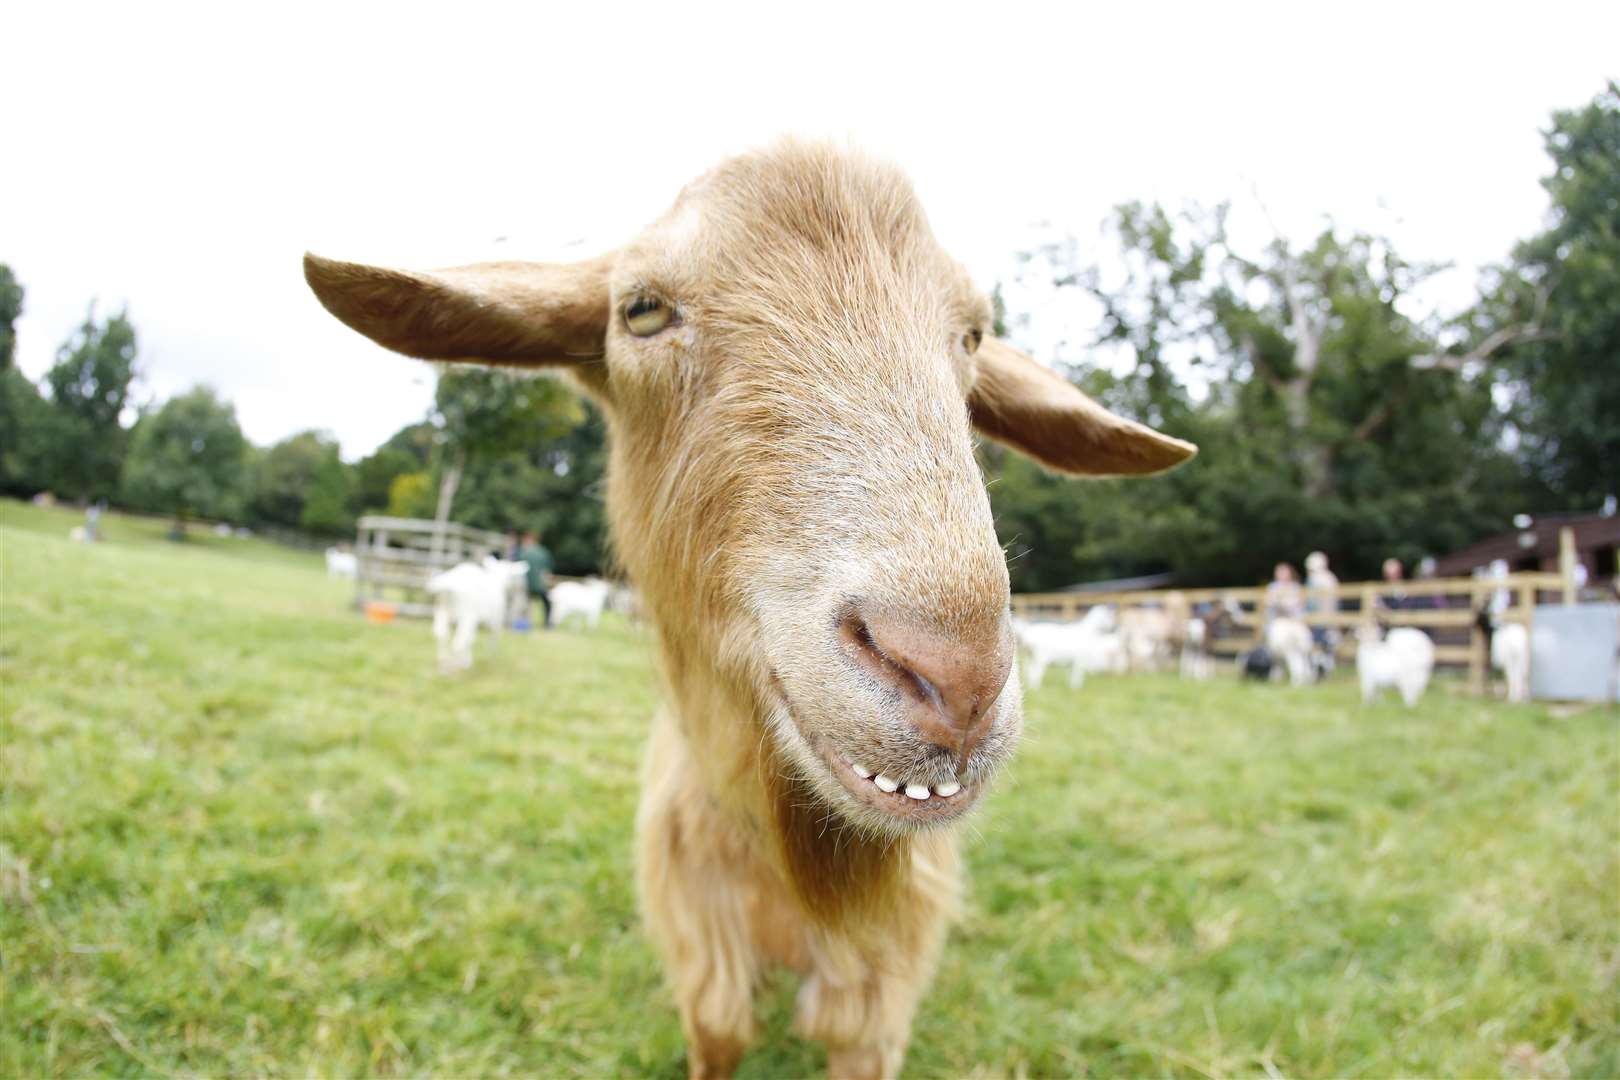 Meet and feed the goats and help support the sanctuary care for them